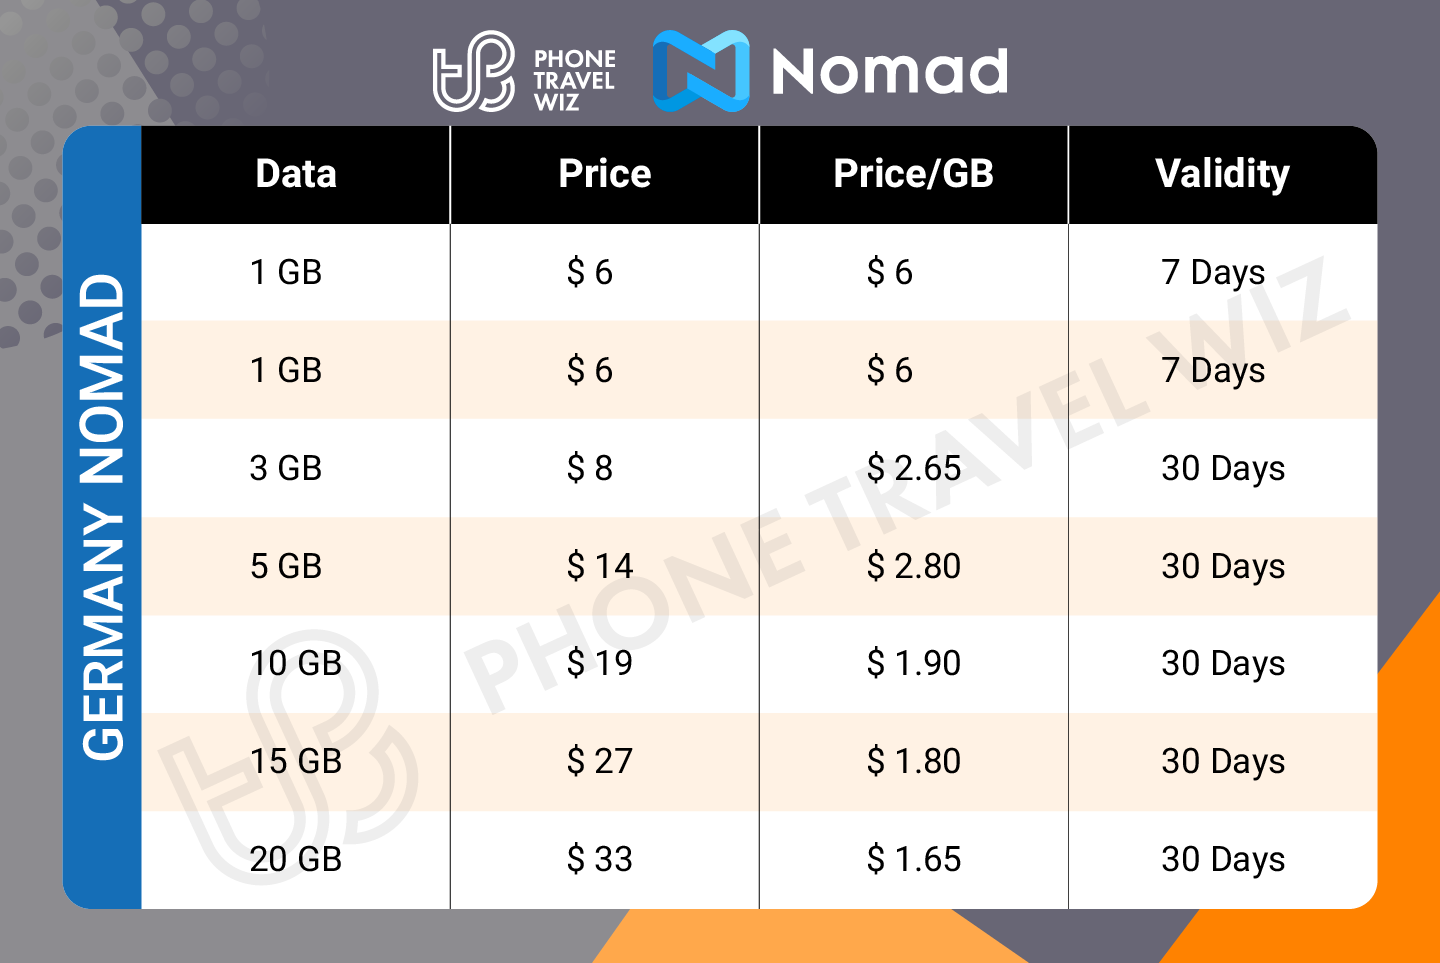 Nomad Germany eSIM Price & Data Details Infographic by Phone Travel Wiz